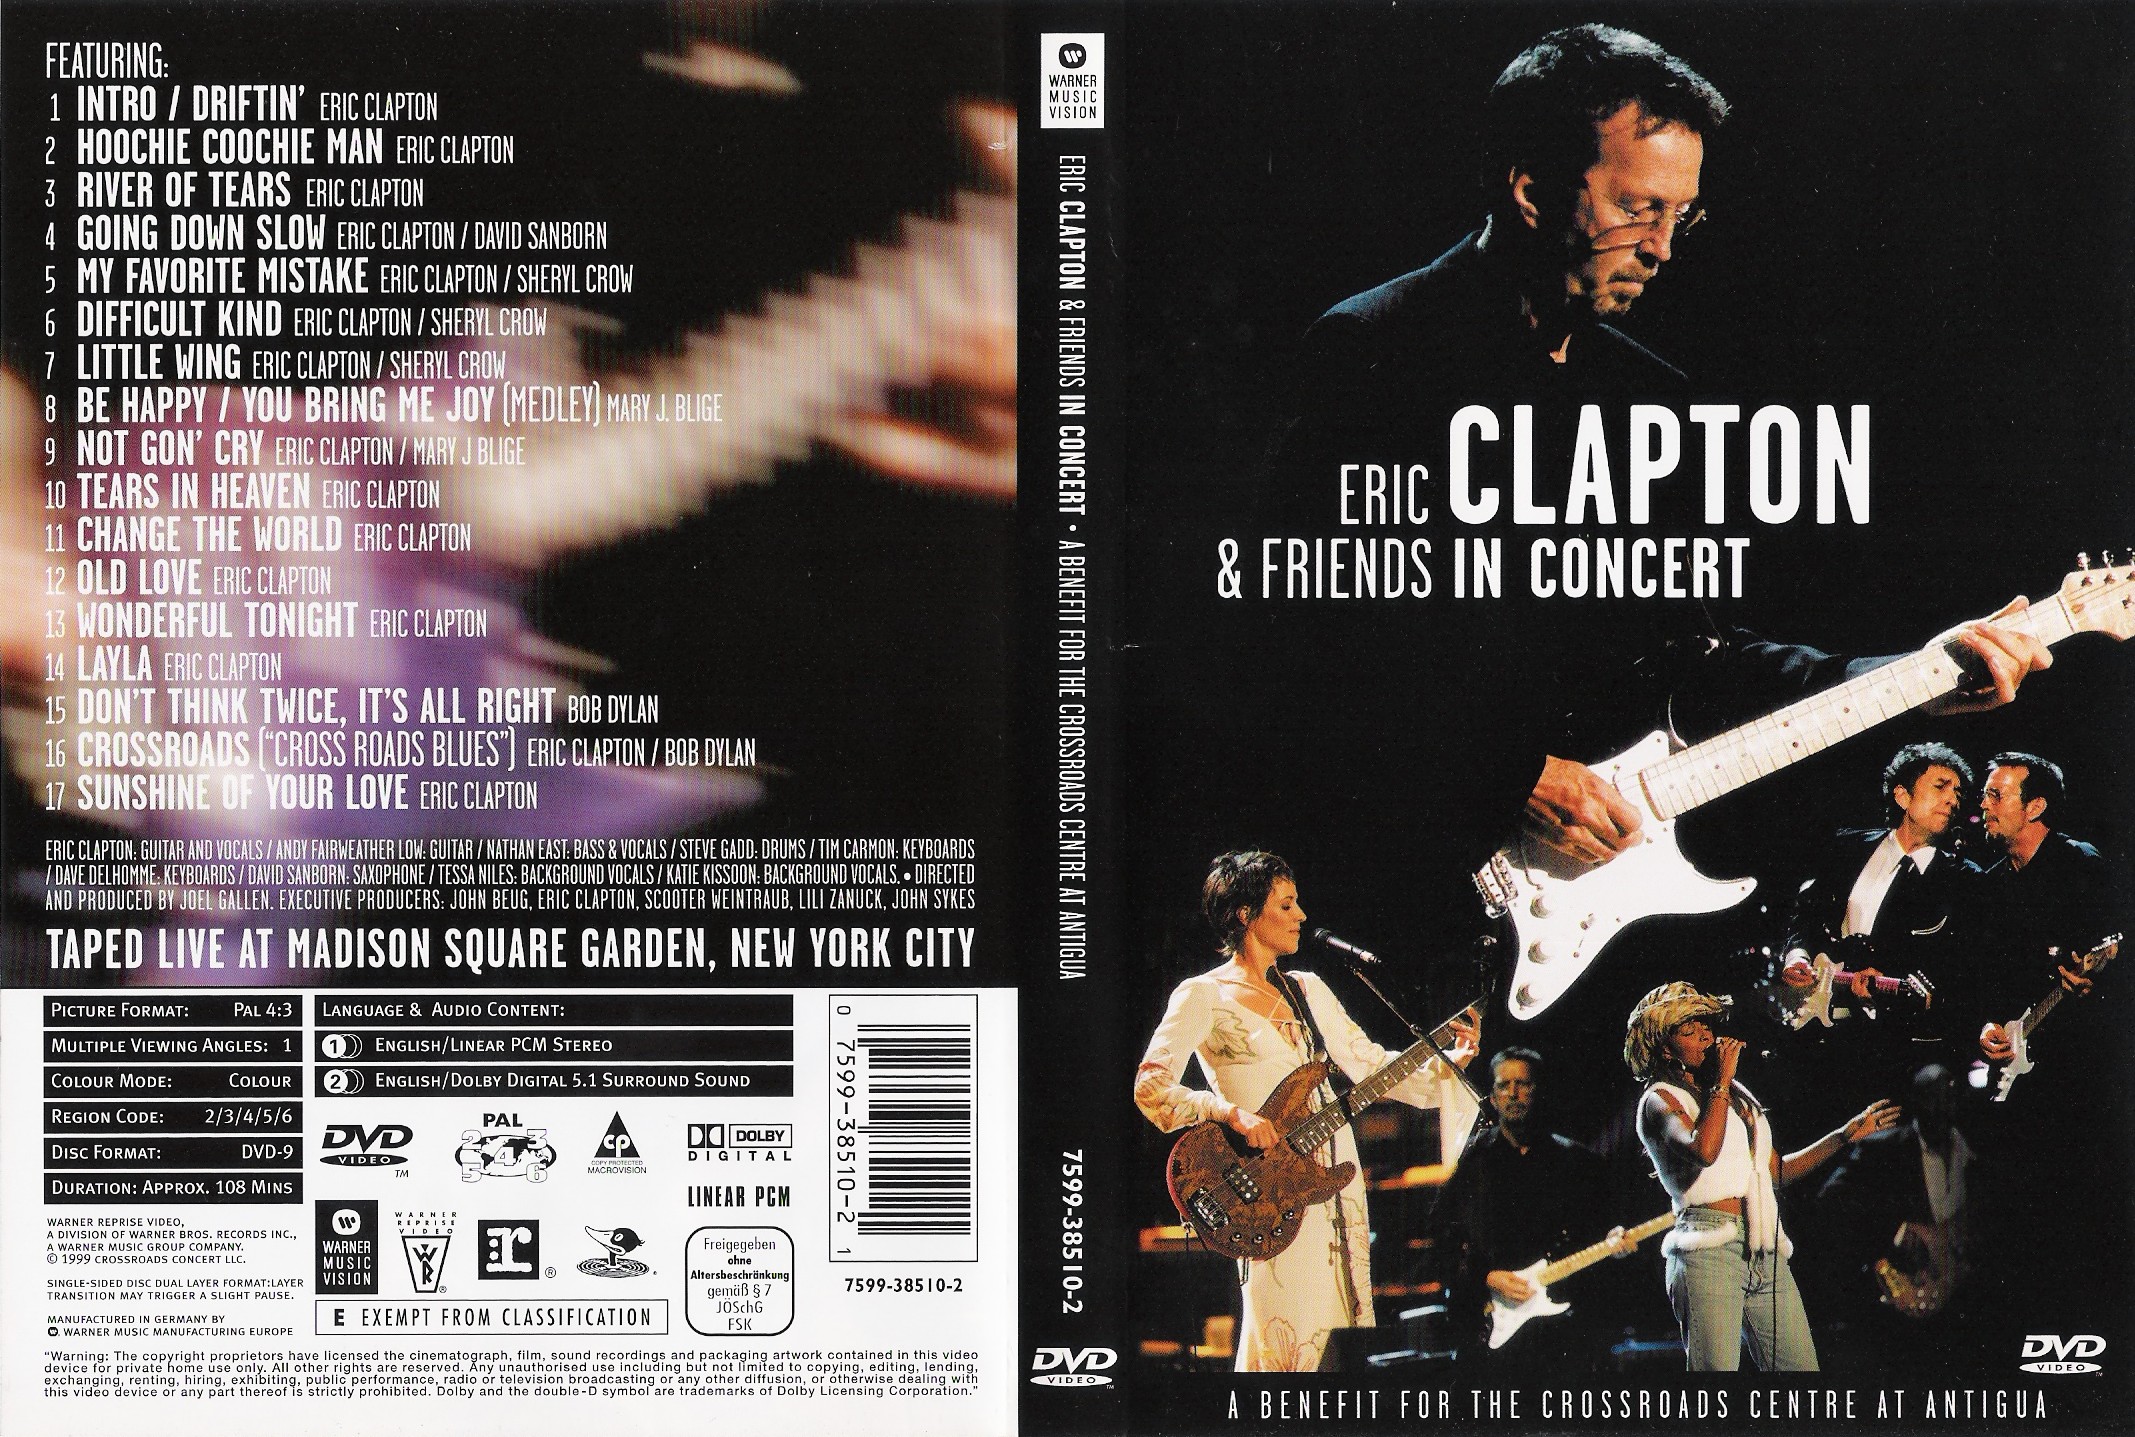 Jaquette DVD Eric Clapton and Friends in concert